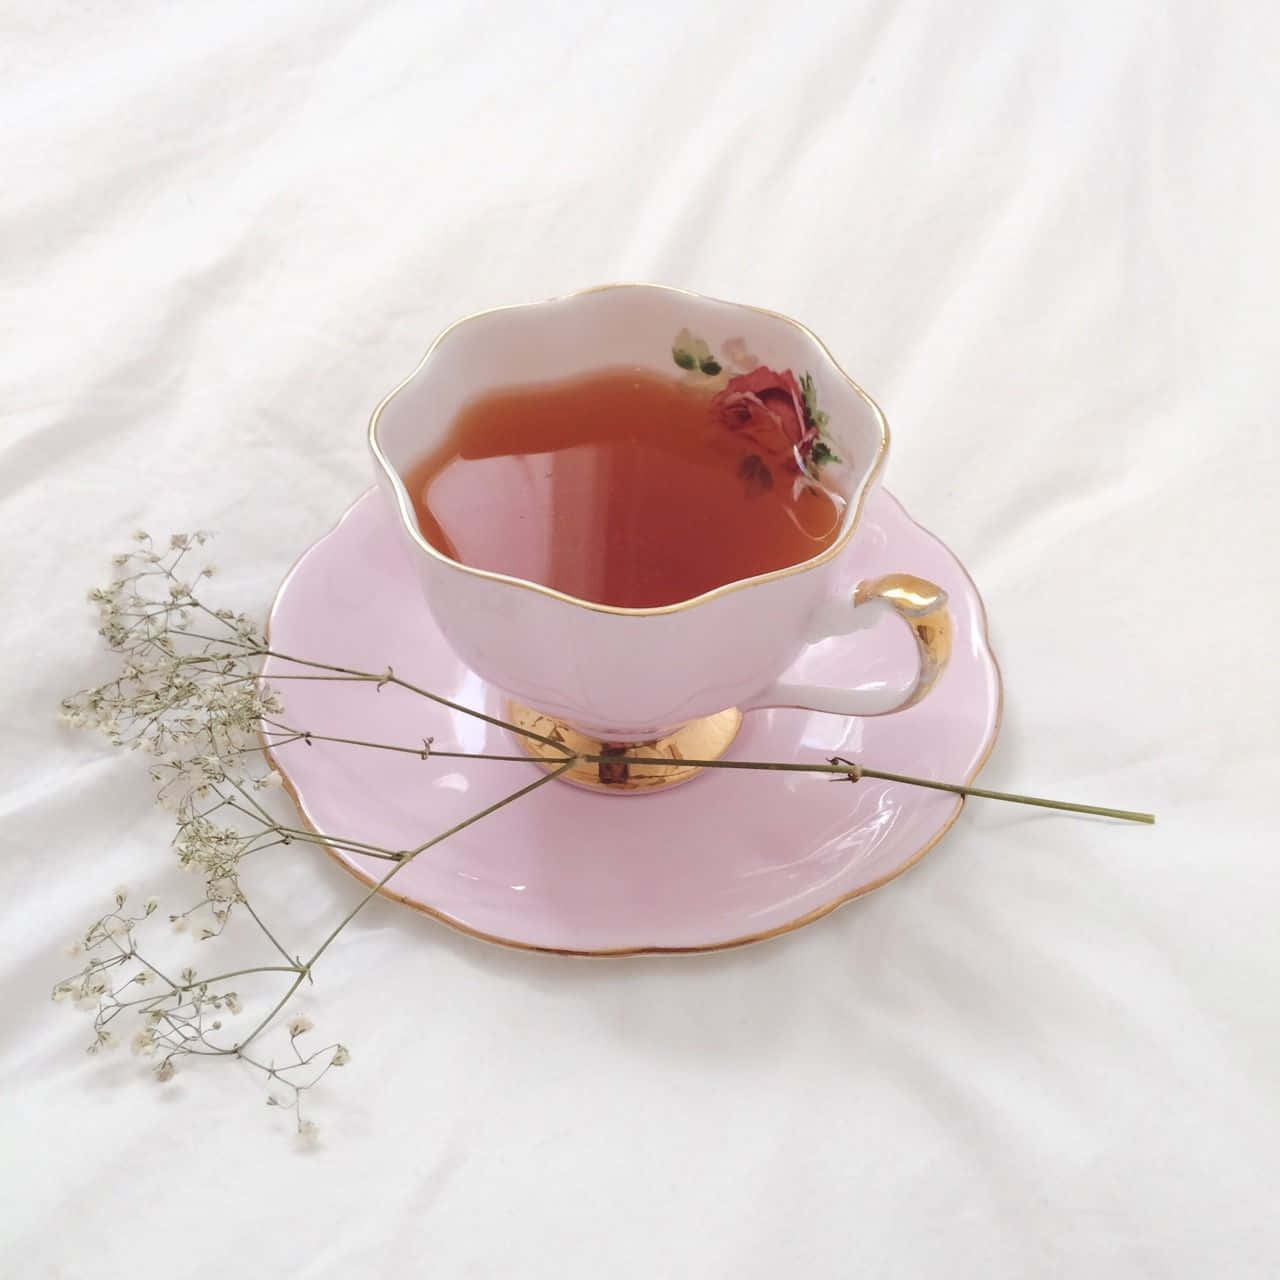 A Pink Tea Cup With Flowers On It